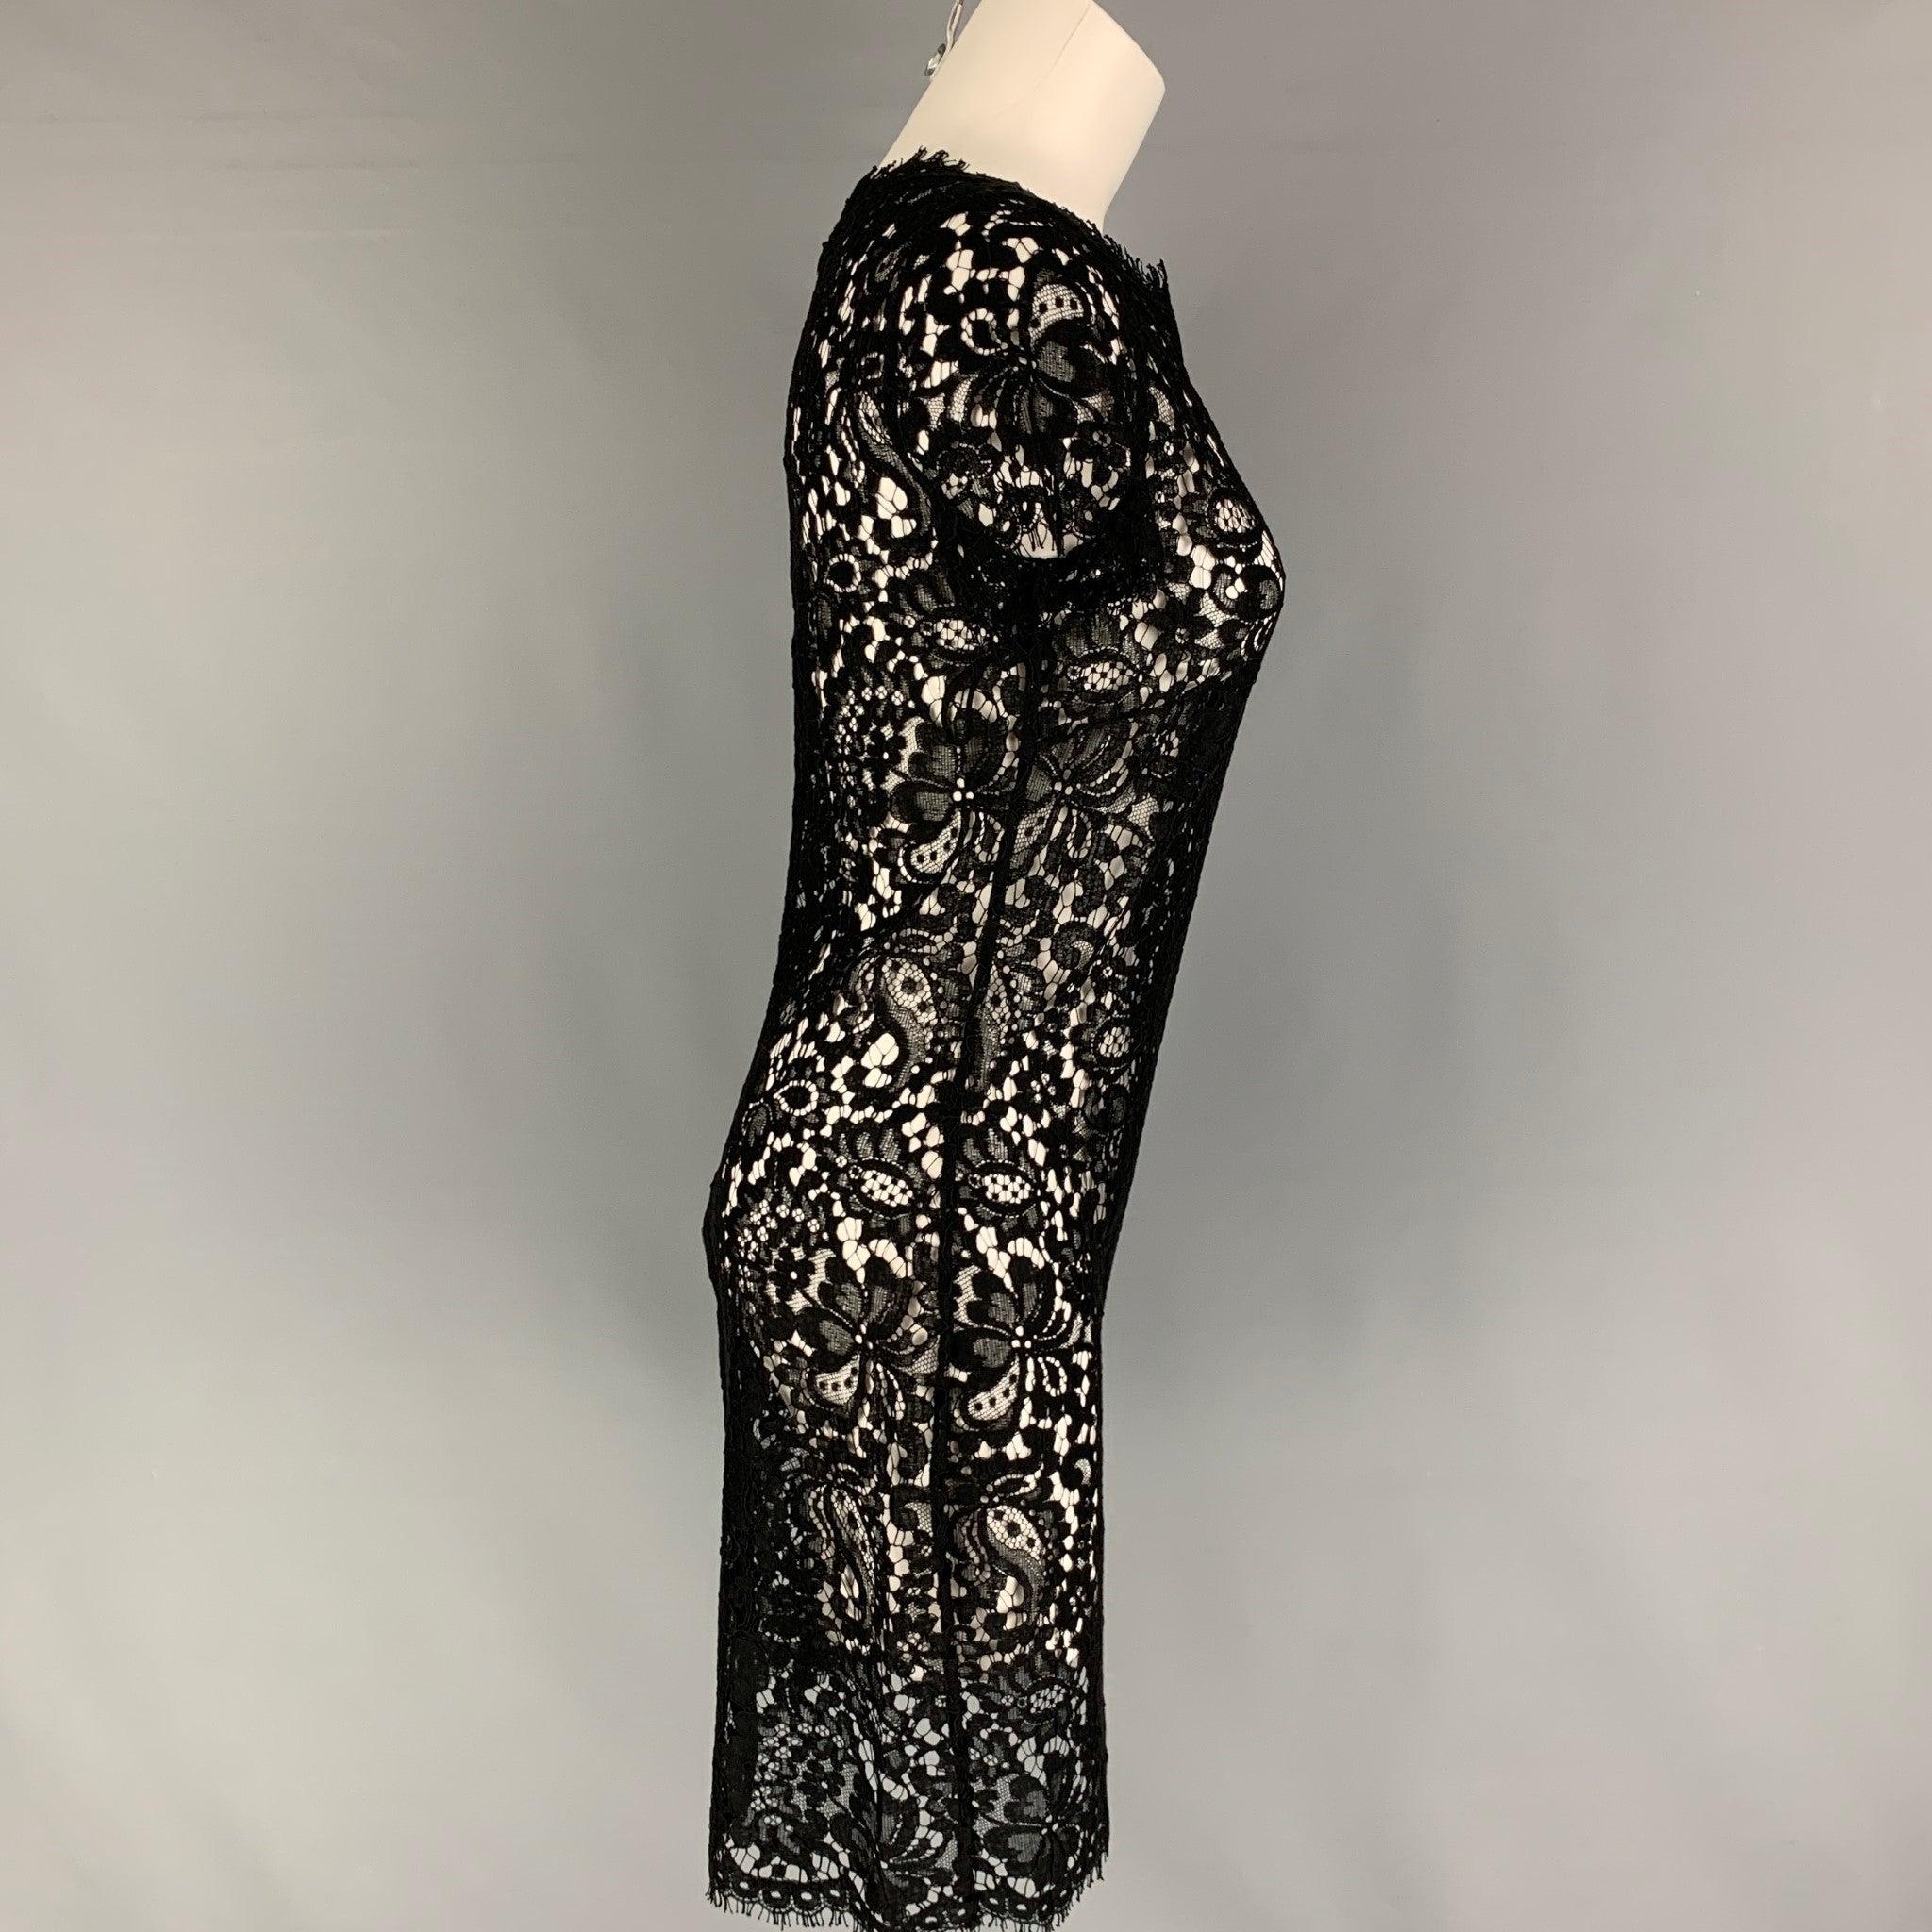 RALPH LAUREN 'Black Label' dress comes in a black lace cotton blend featuring short sleeves and a back zip up closure.
Very Good
Pre-Owned Condition. 

Marked:   10  

Measurements: 
 
Shoulder: 15 inches  Bust: 34 inches  Waist: 32 inches  Hip: 36